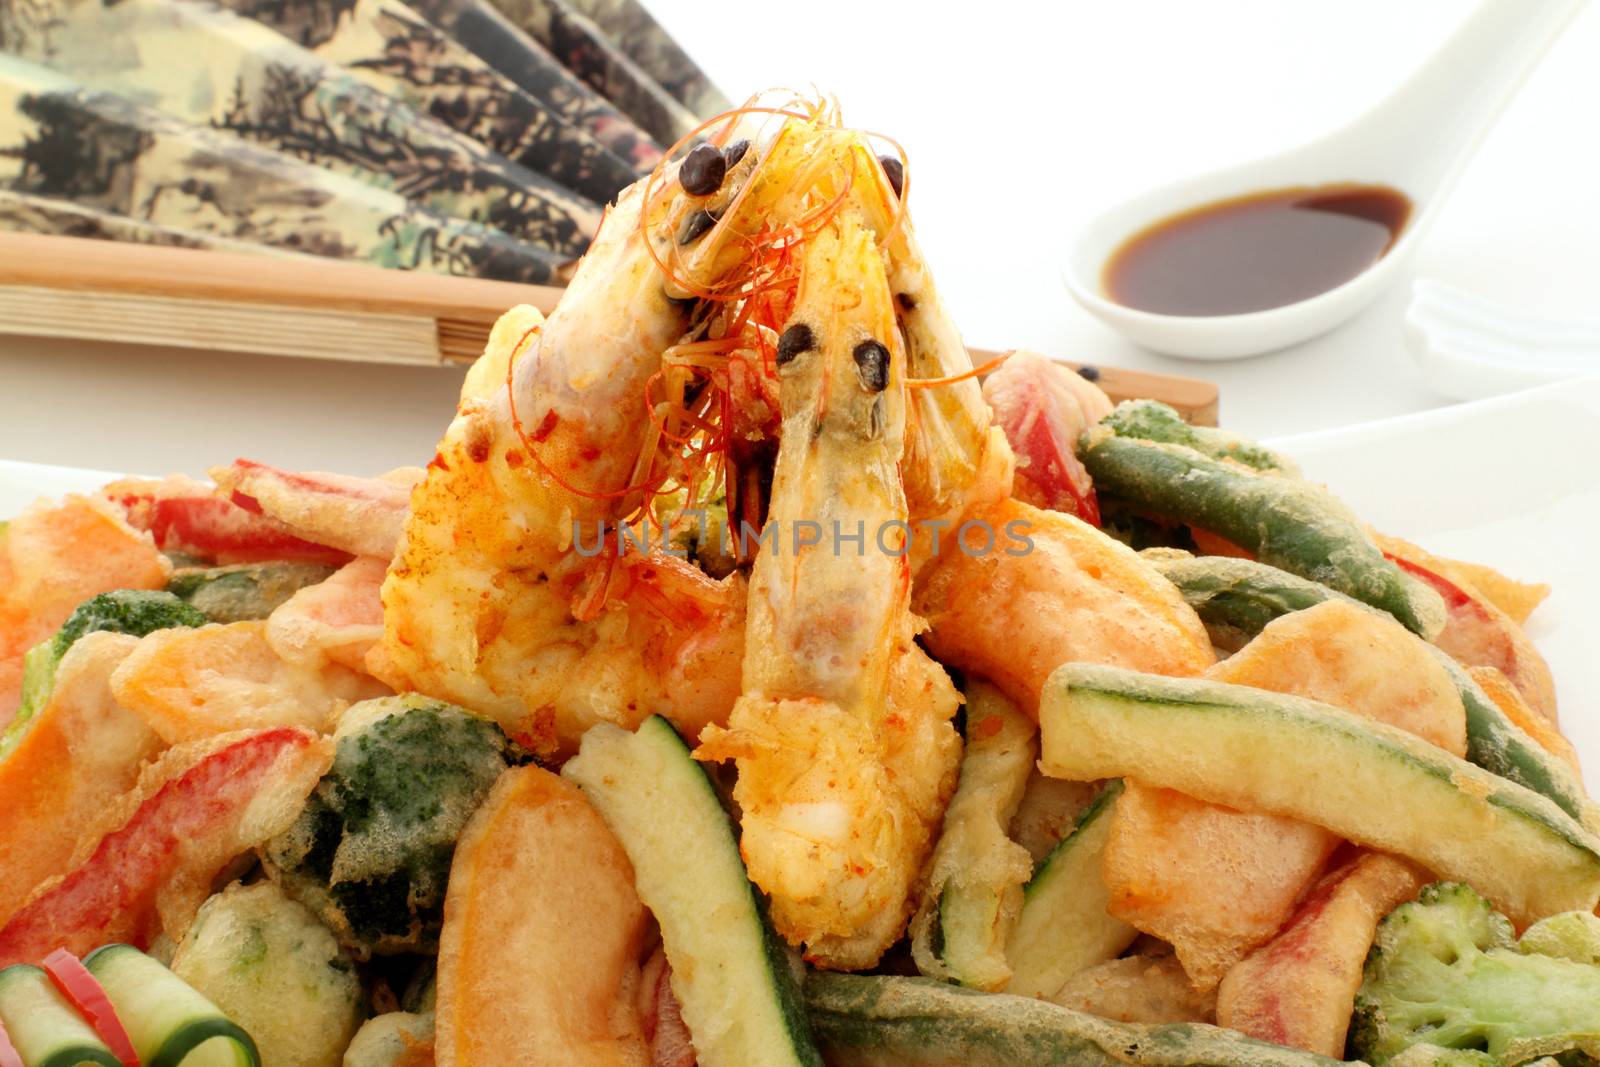 Japanese fried tempura with shrimp and vegetables with zucchini garnish.